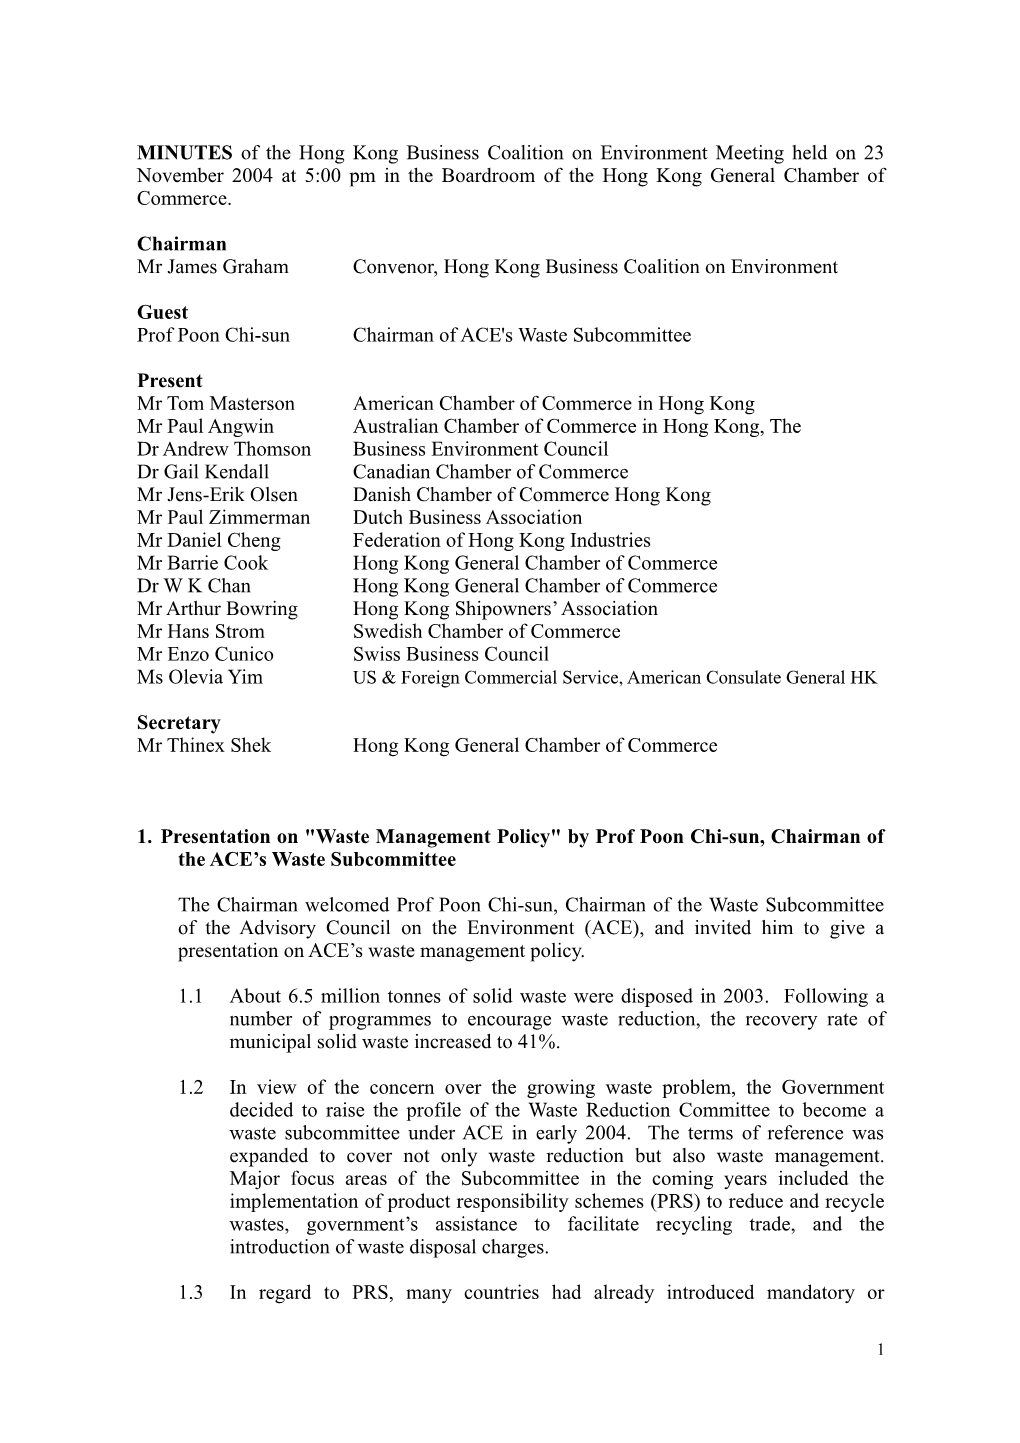 MINUTES of the Hong Kong Business Coalition on Environment Meeting Held on 21 May 2003